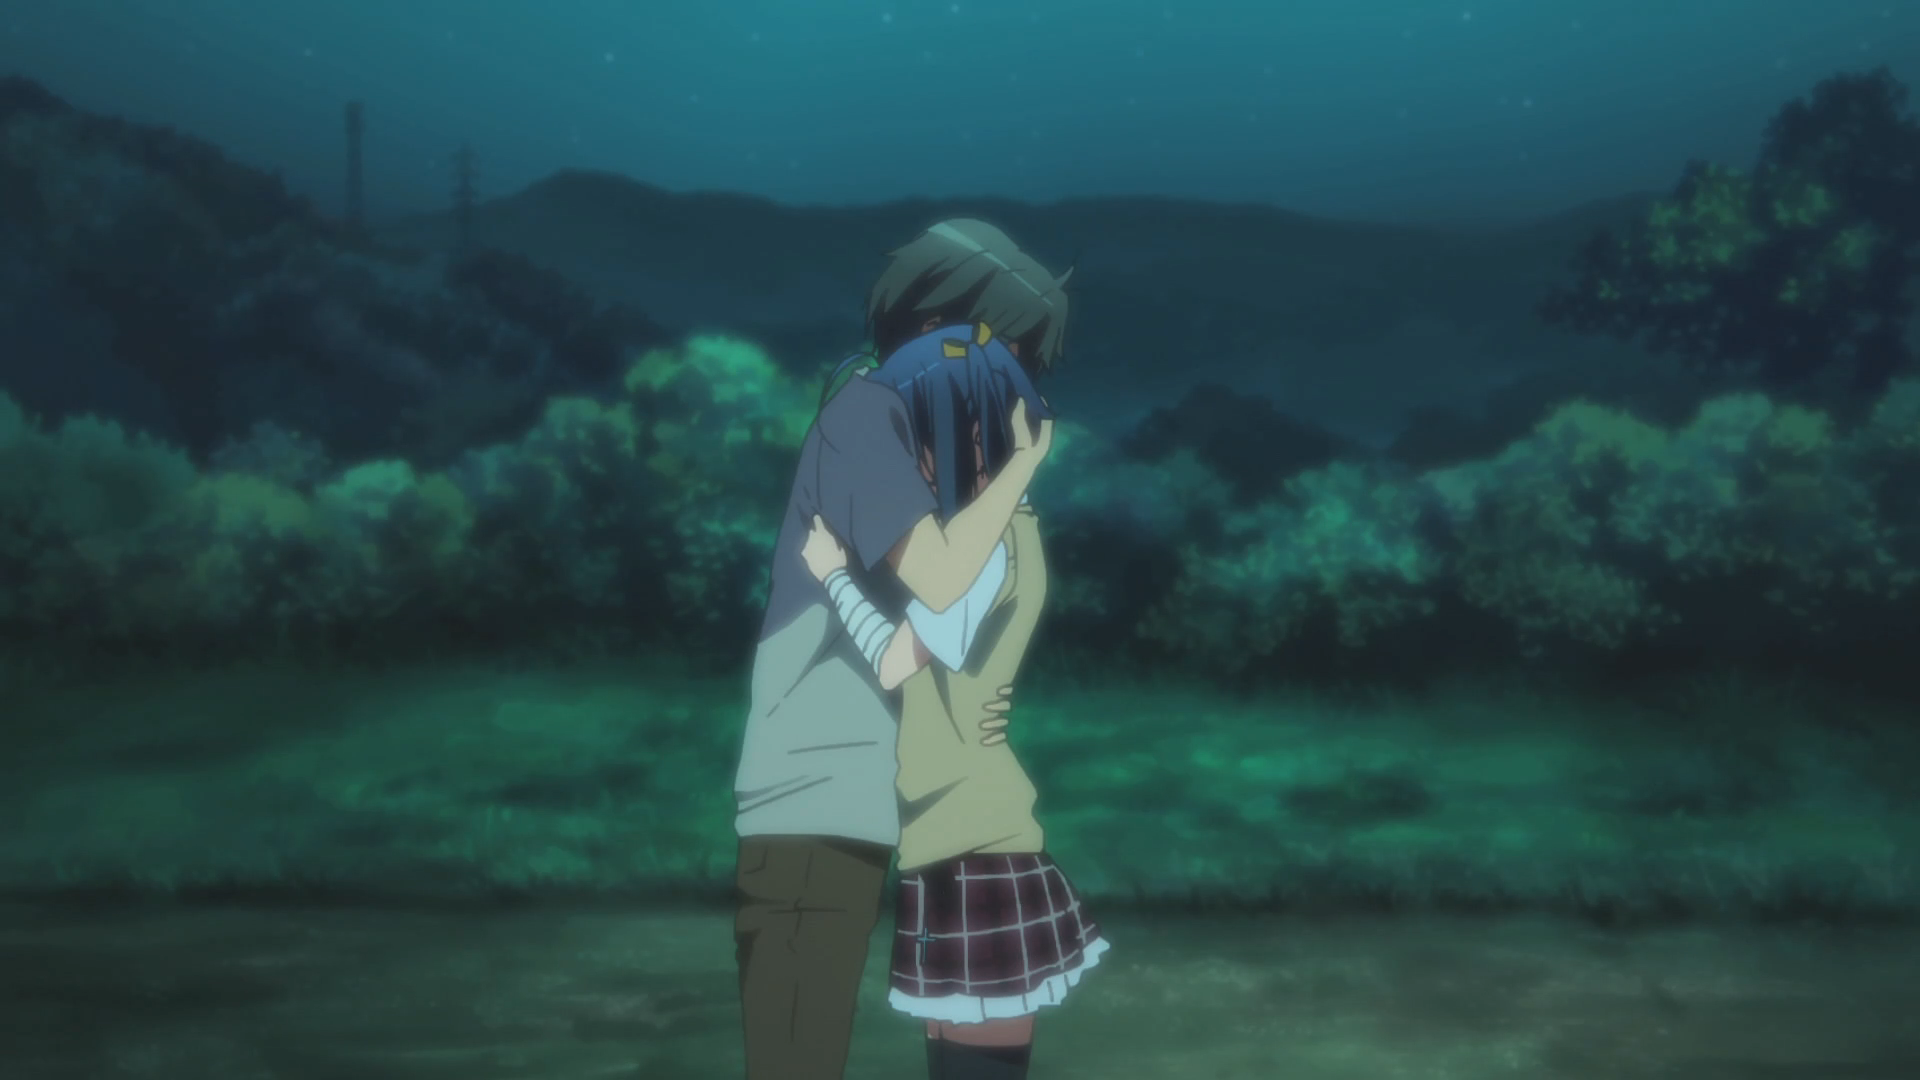 Review: Love, Chunibyo, and Other Delusions! Ren Episode 3: Magical Devil  Girl in Pursuit